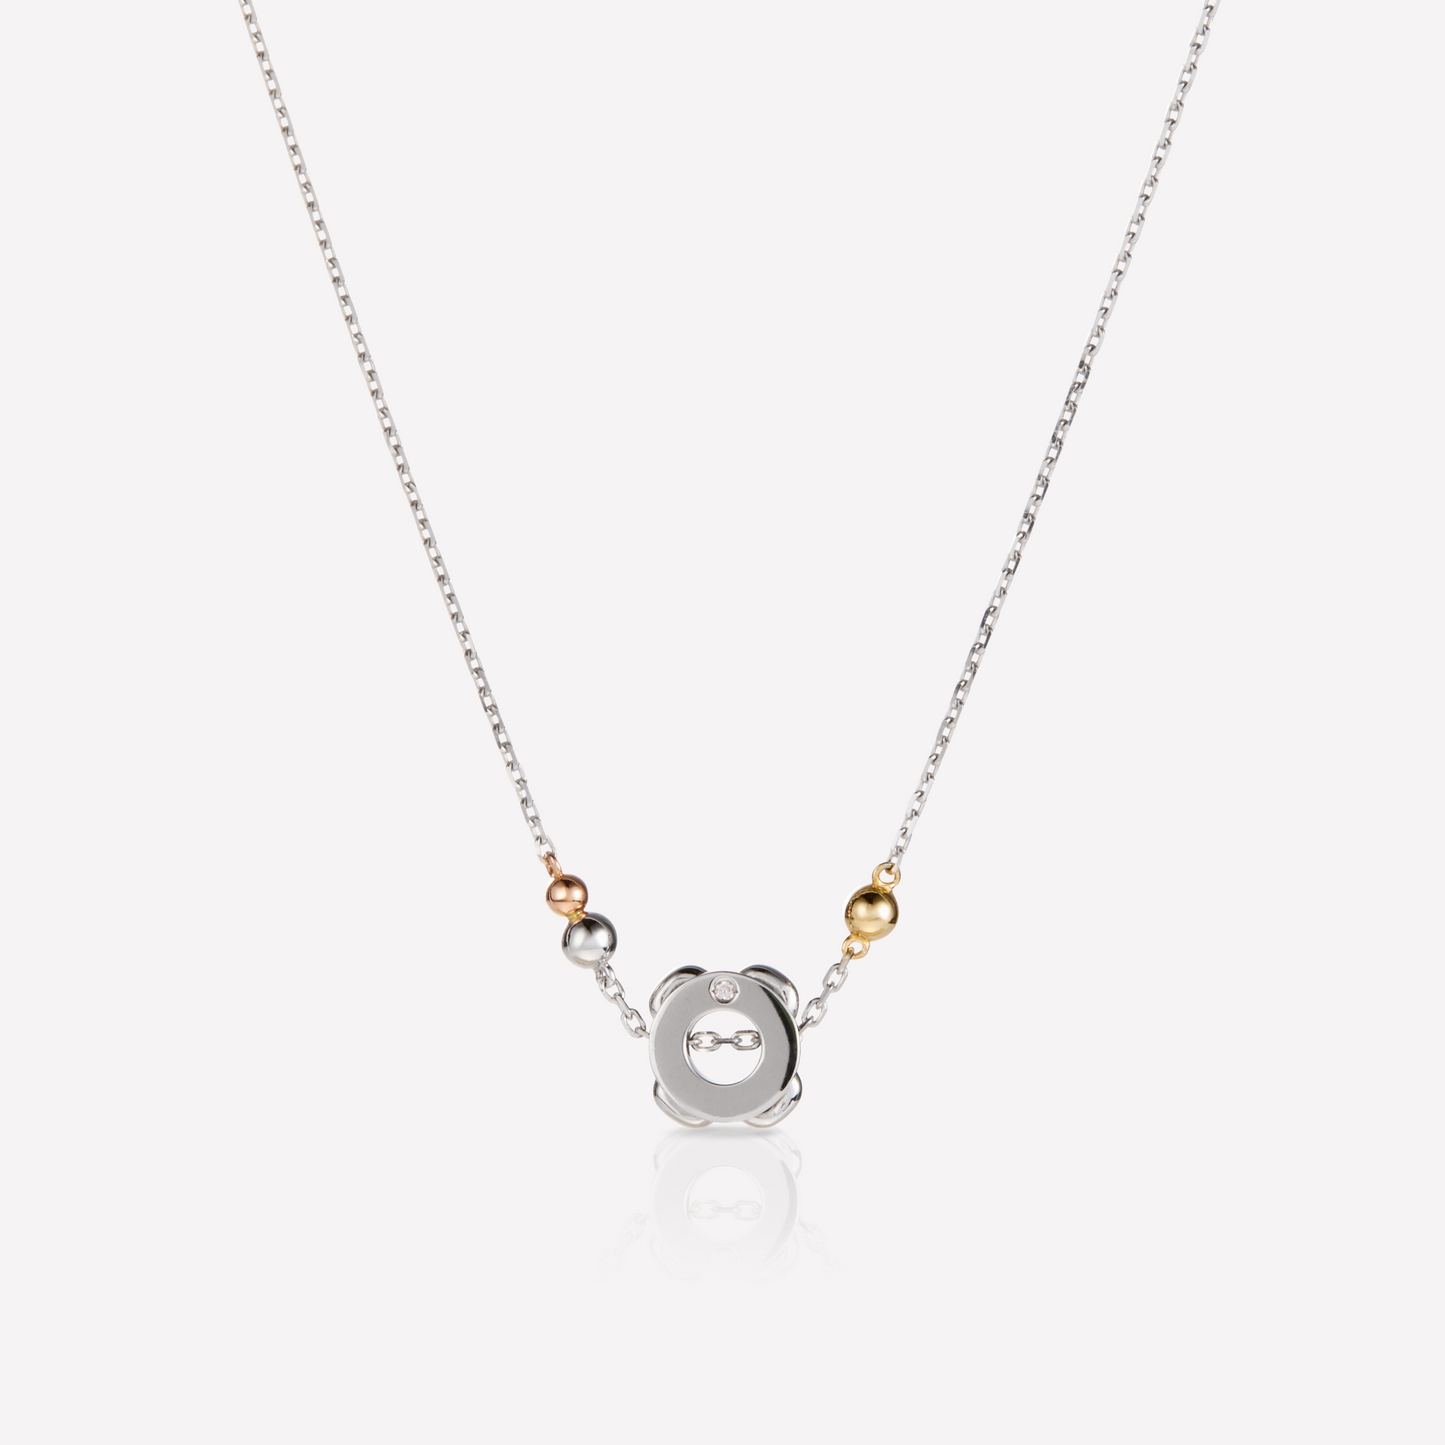 Twined 2.5 Necklace, Droplet, Diamond